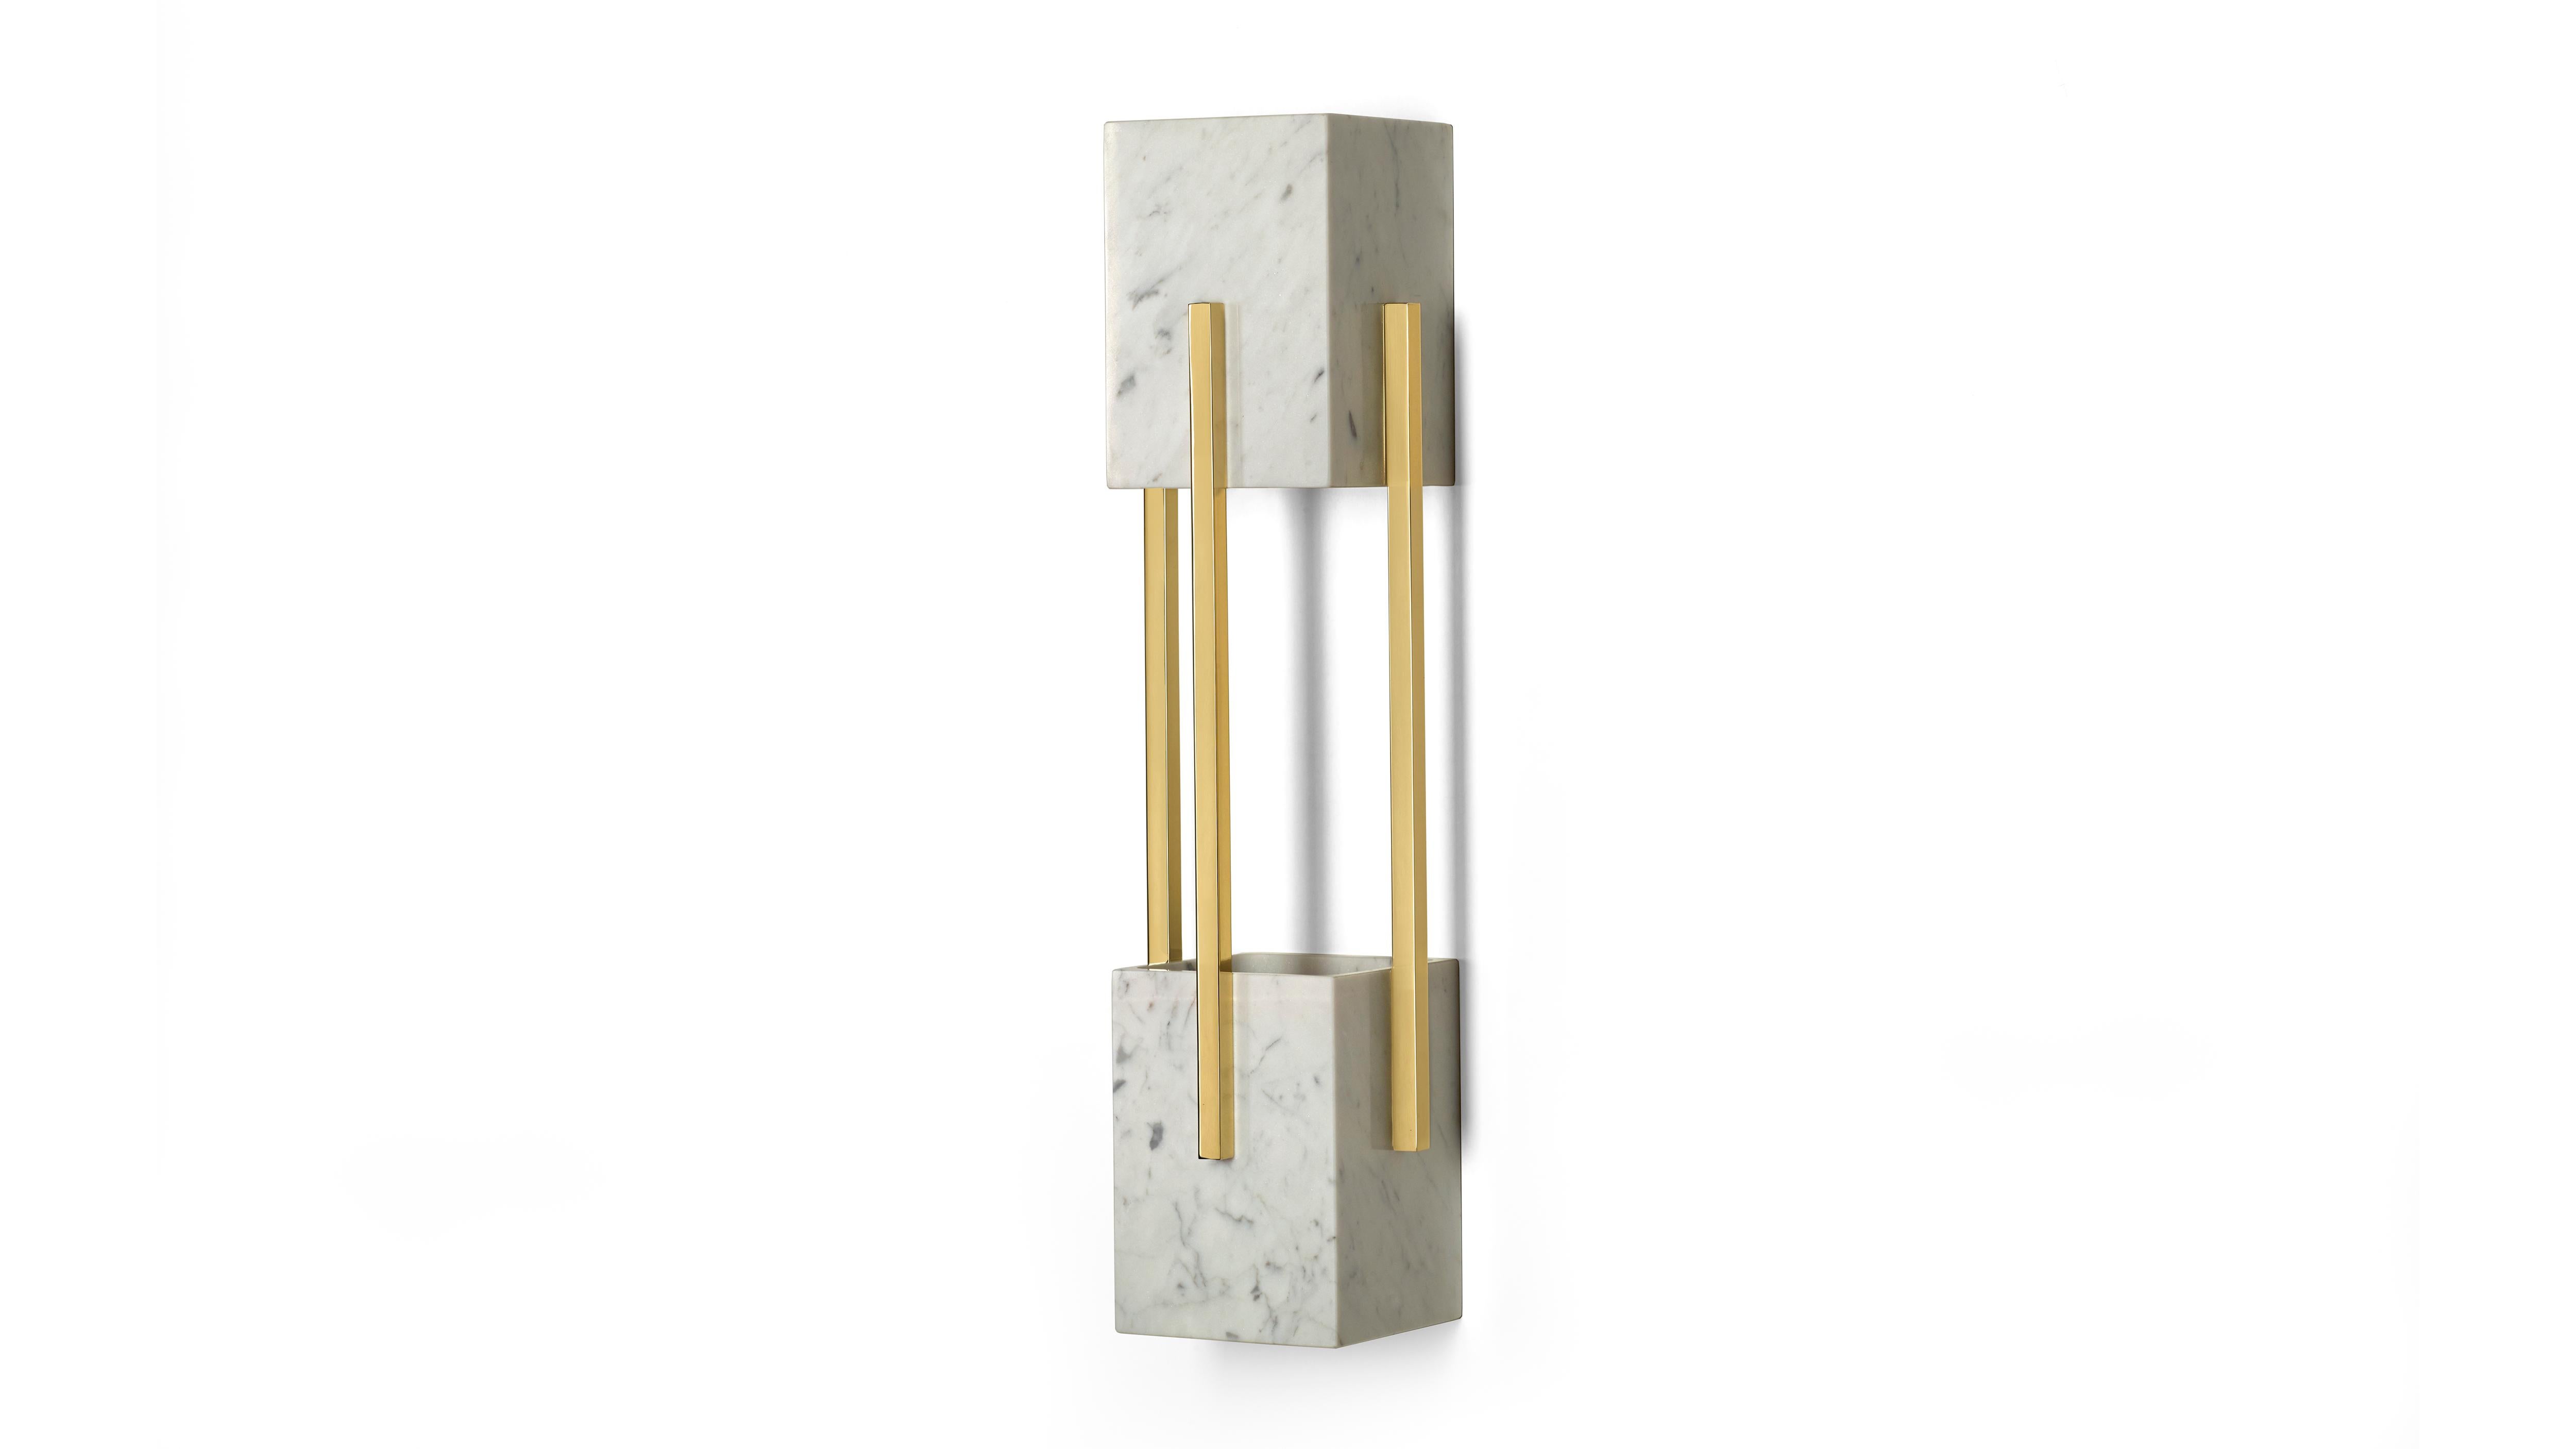 Looshaus Carrara Marble and Brass Wall Lamp by InsidherLand
Dimensions: D 13 x W 14 x H 56 cm.
Materials: Carrara marble, polished brass.
3.5 kg.
Available in other marbles and metals.

The Looshaus building by Architect Adolf Loos in Vienna marked